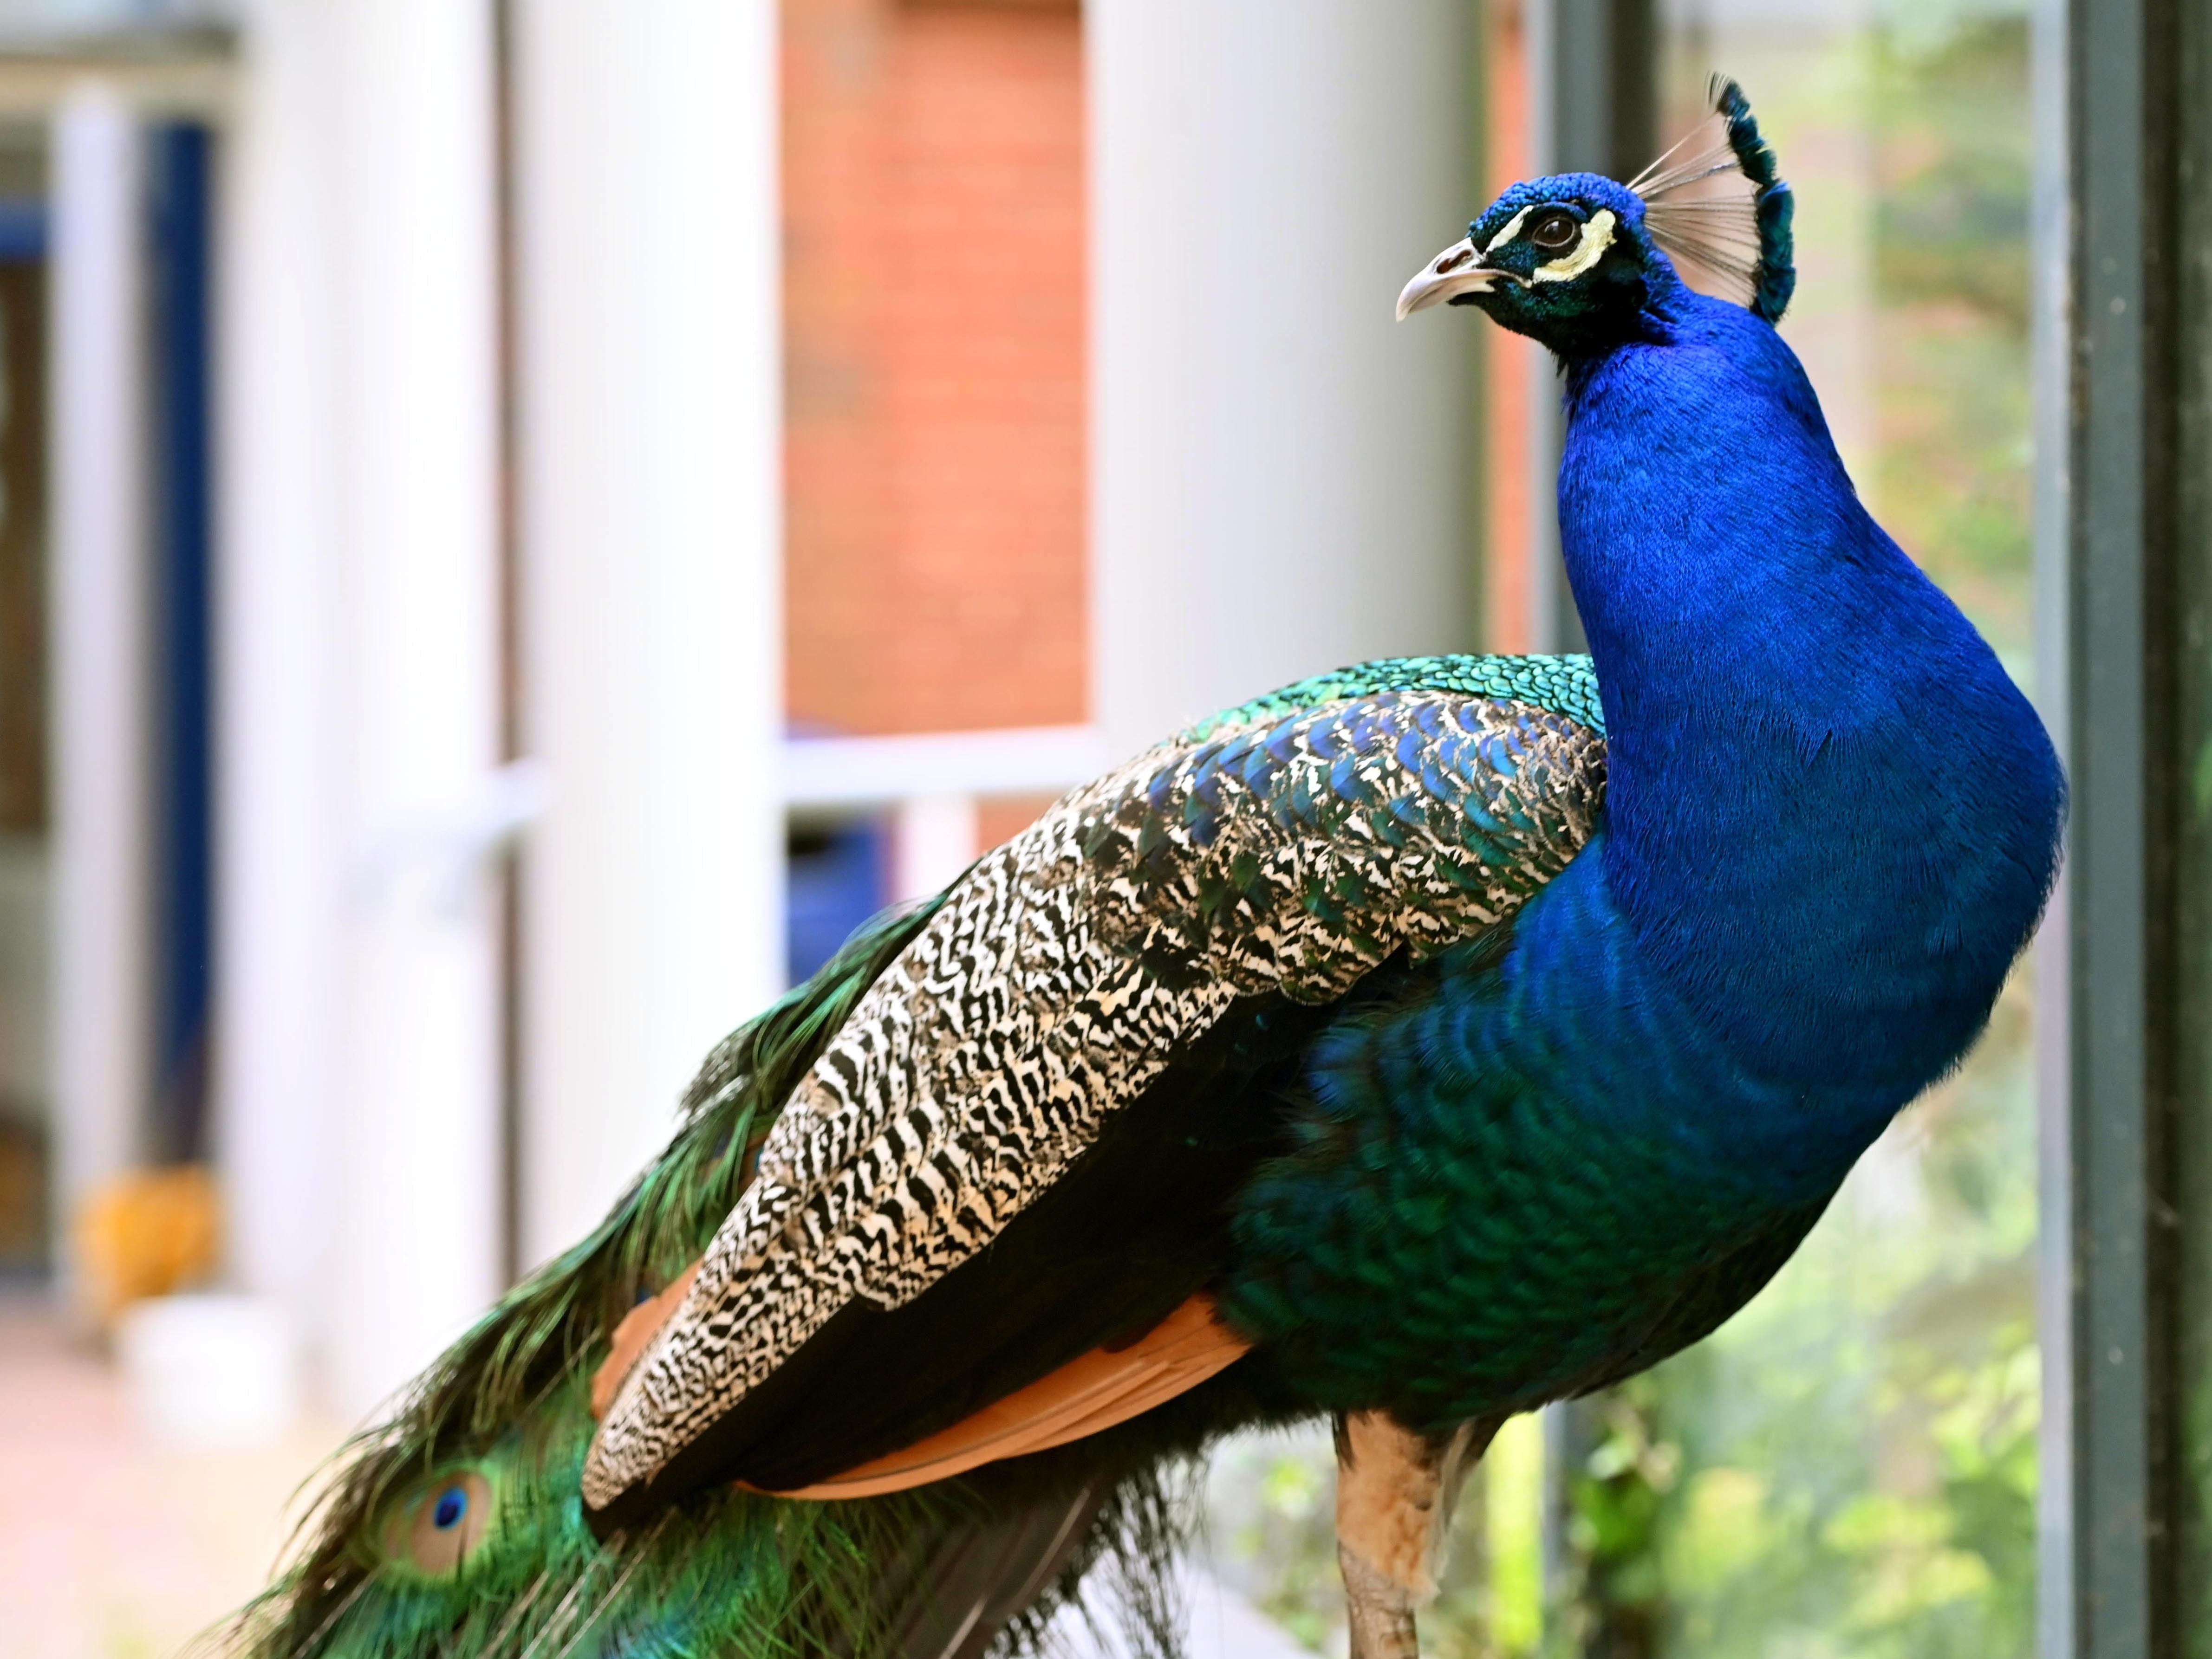 'He will be getting an honorary degree if he stays here much longer' - Meet Pedro the university campus peacock